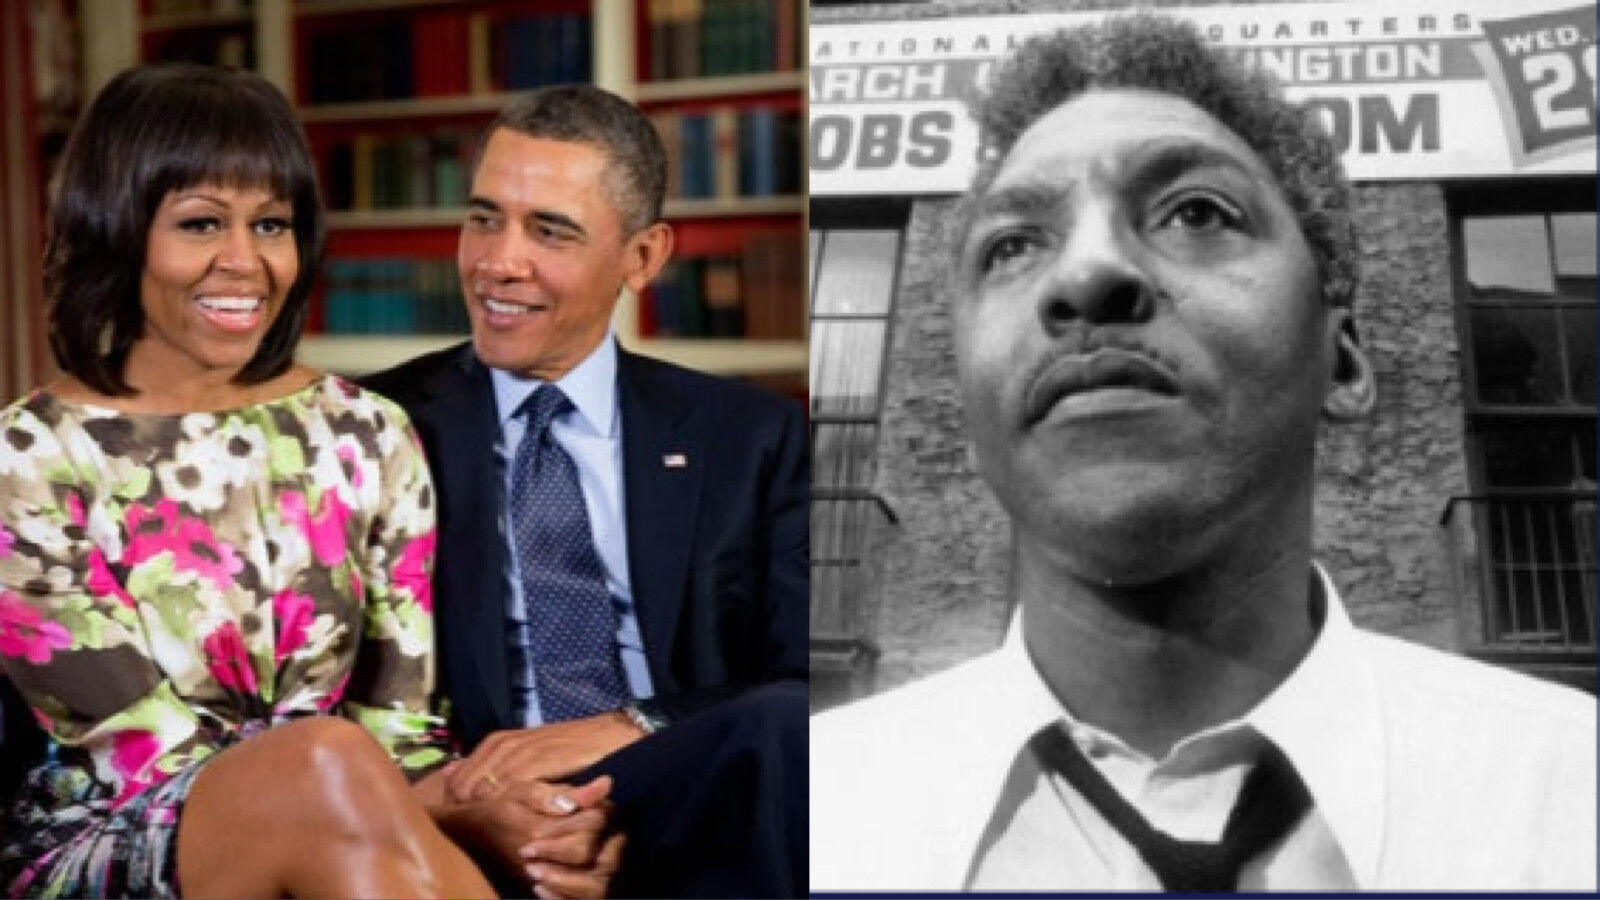 The Obamas will produce an upcoming film about Bayard Rustin